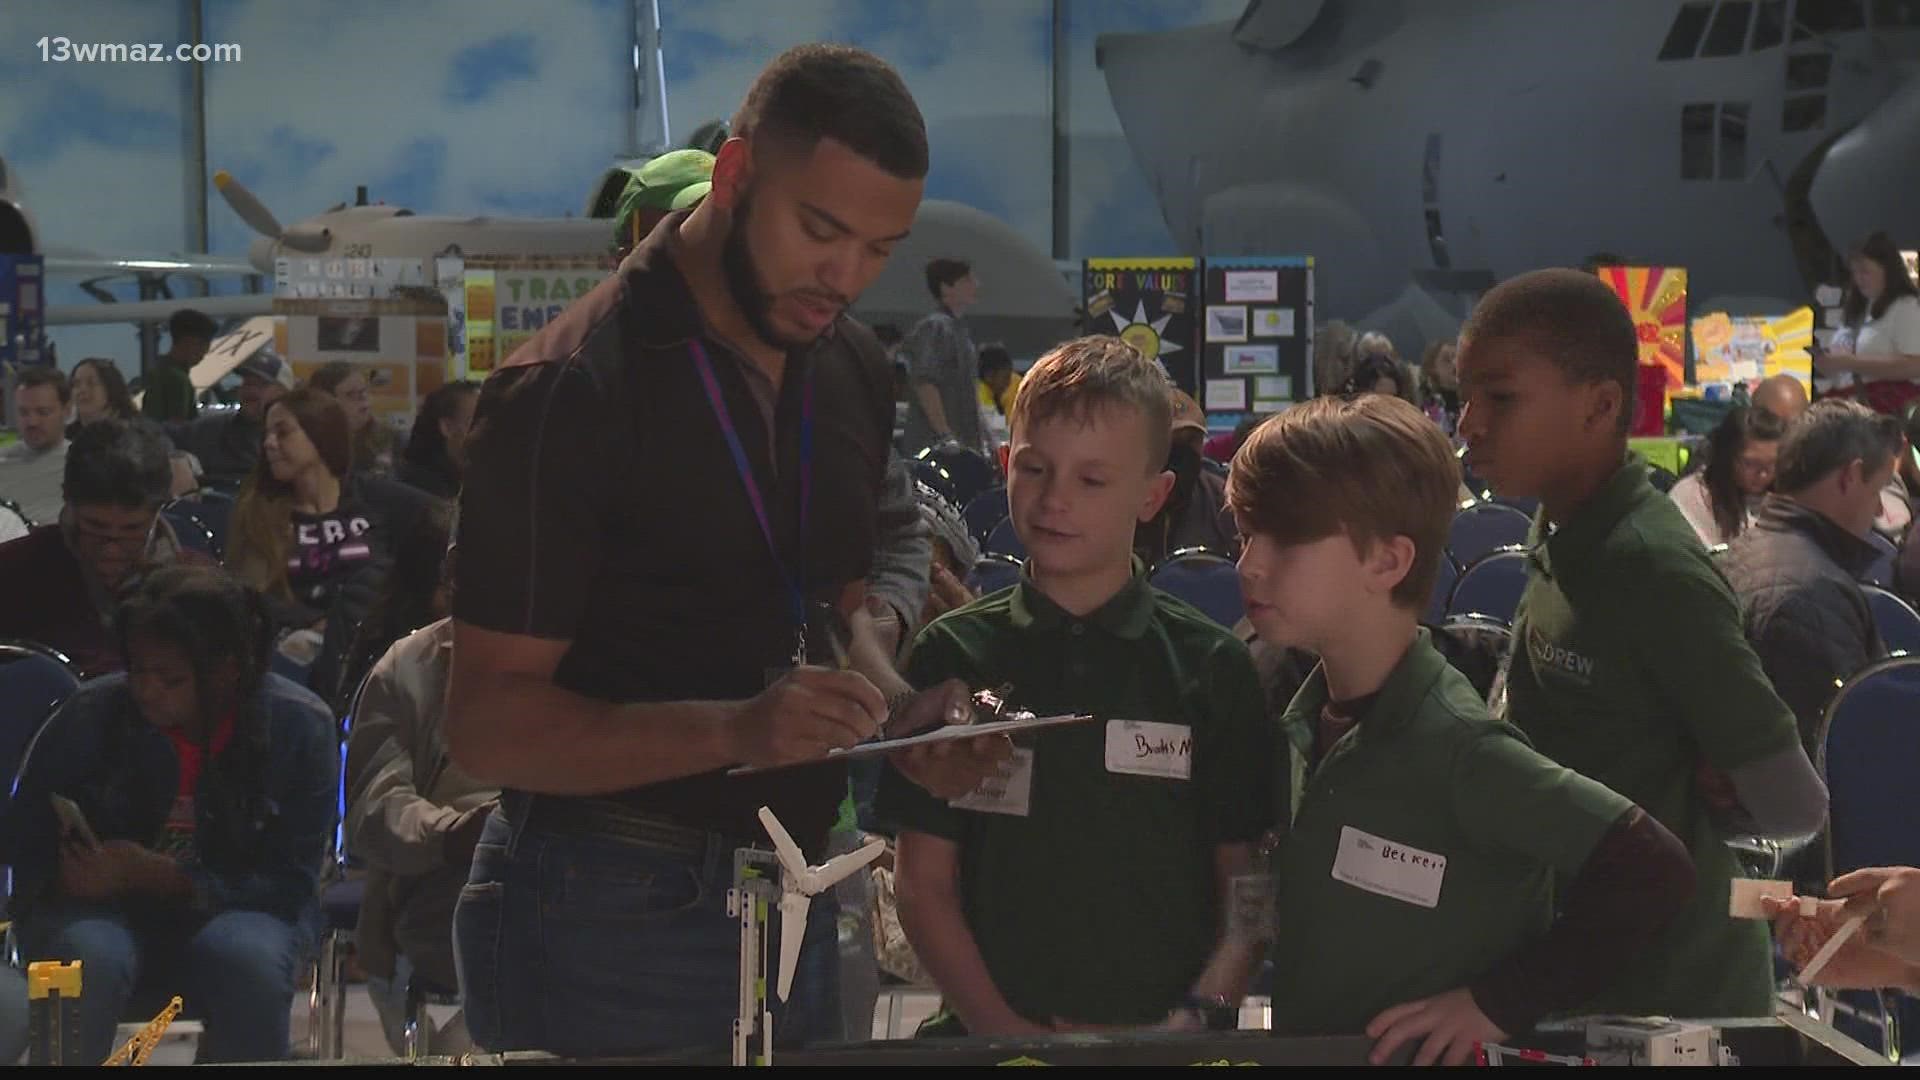 The qualifier helps educate students about S.T.E.M., and was held at the Museum of Aviation.